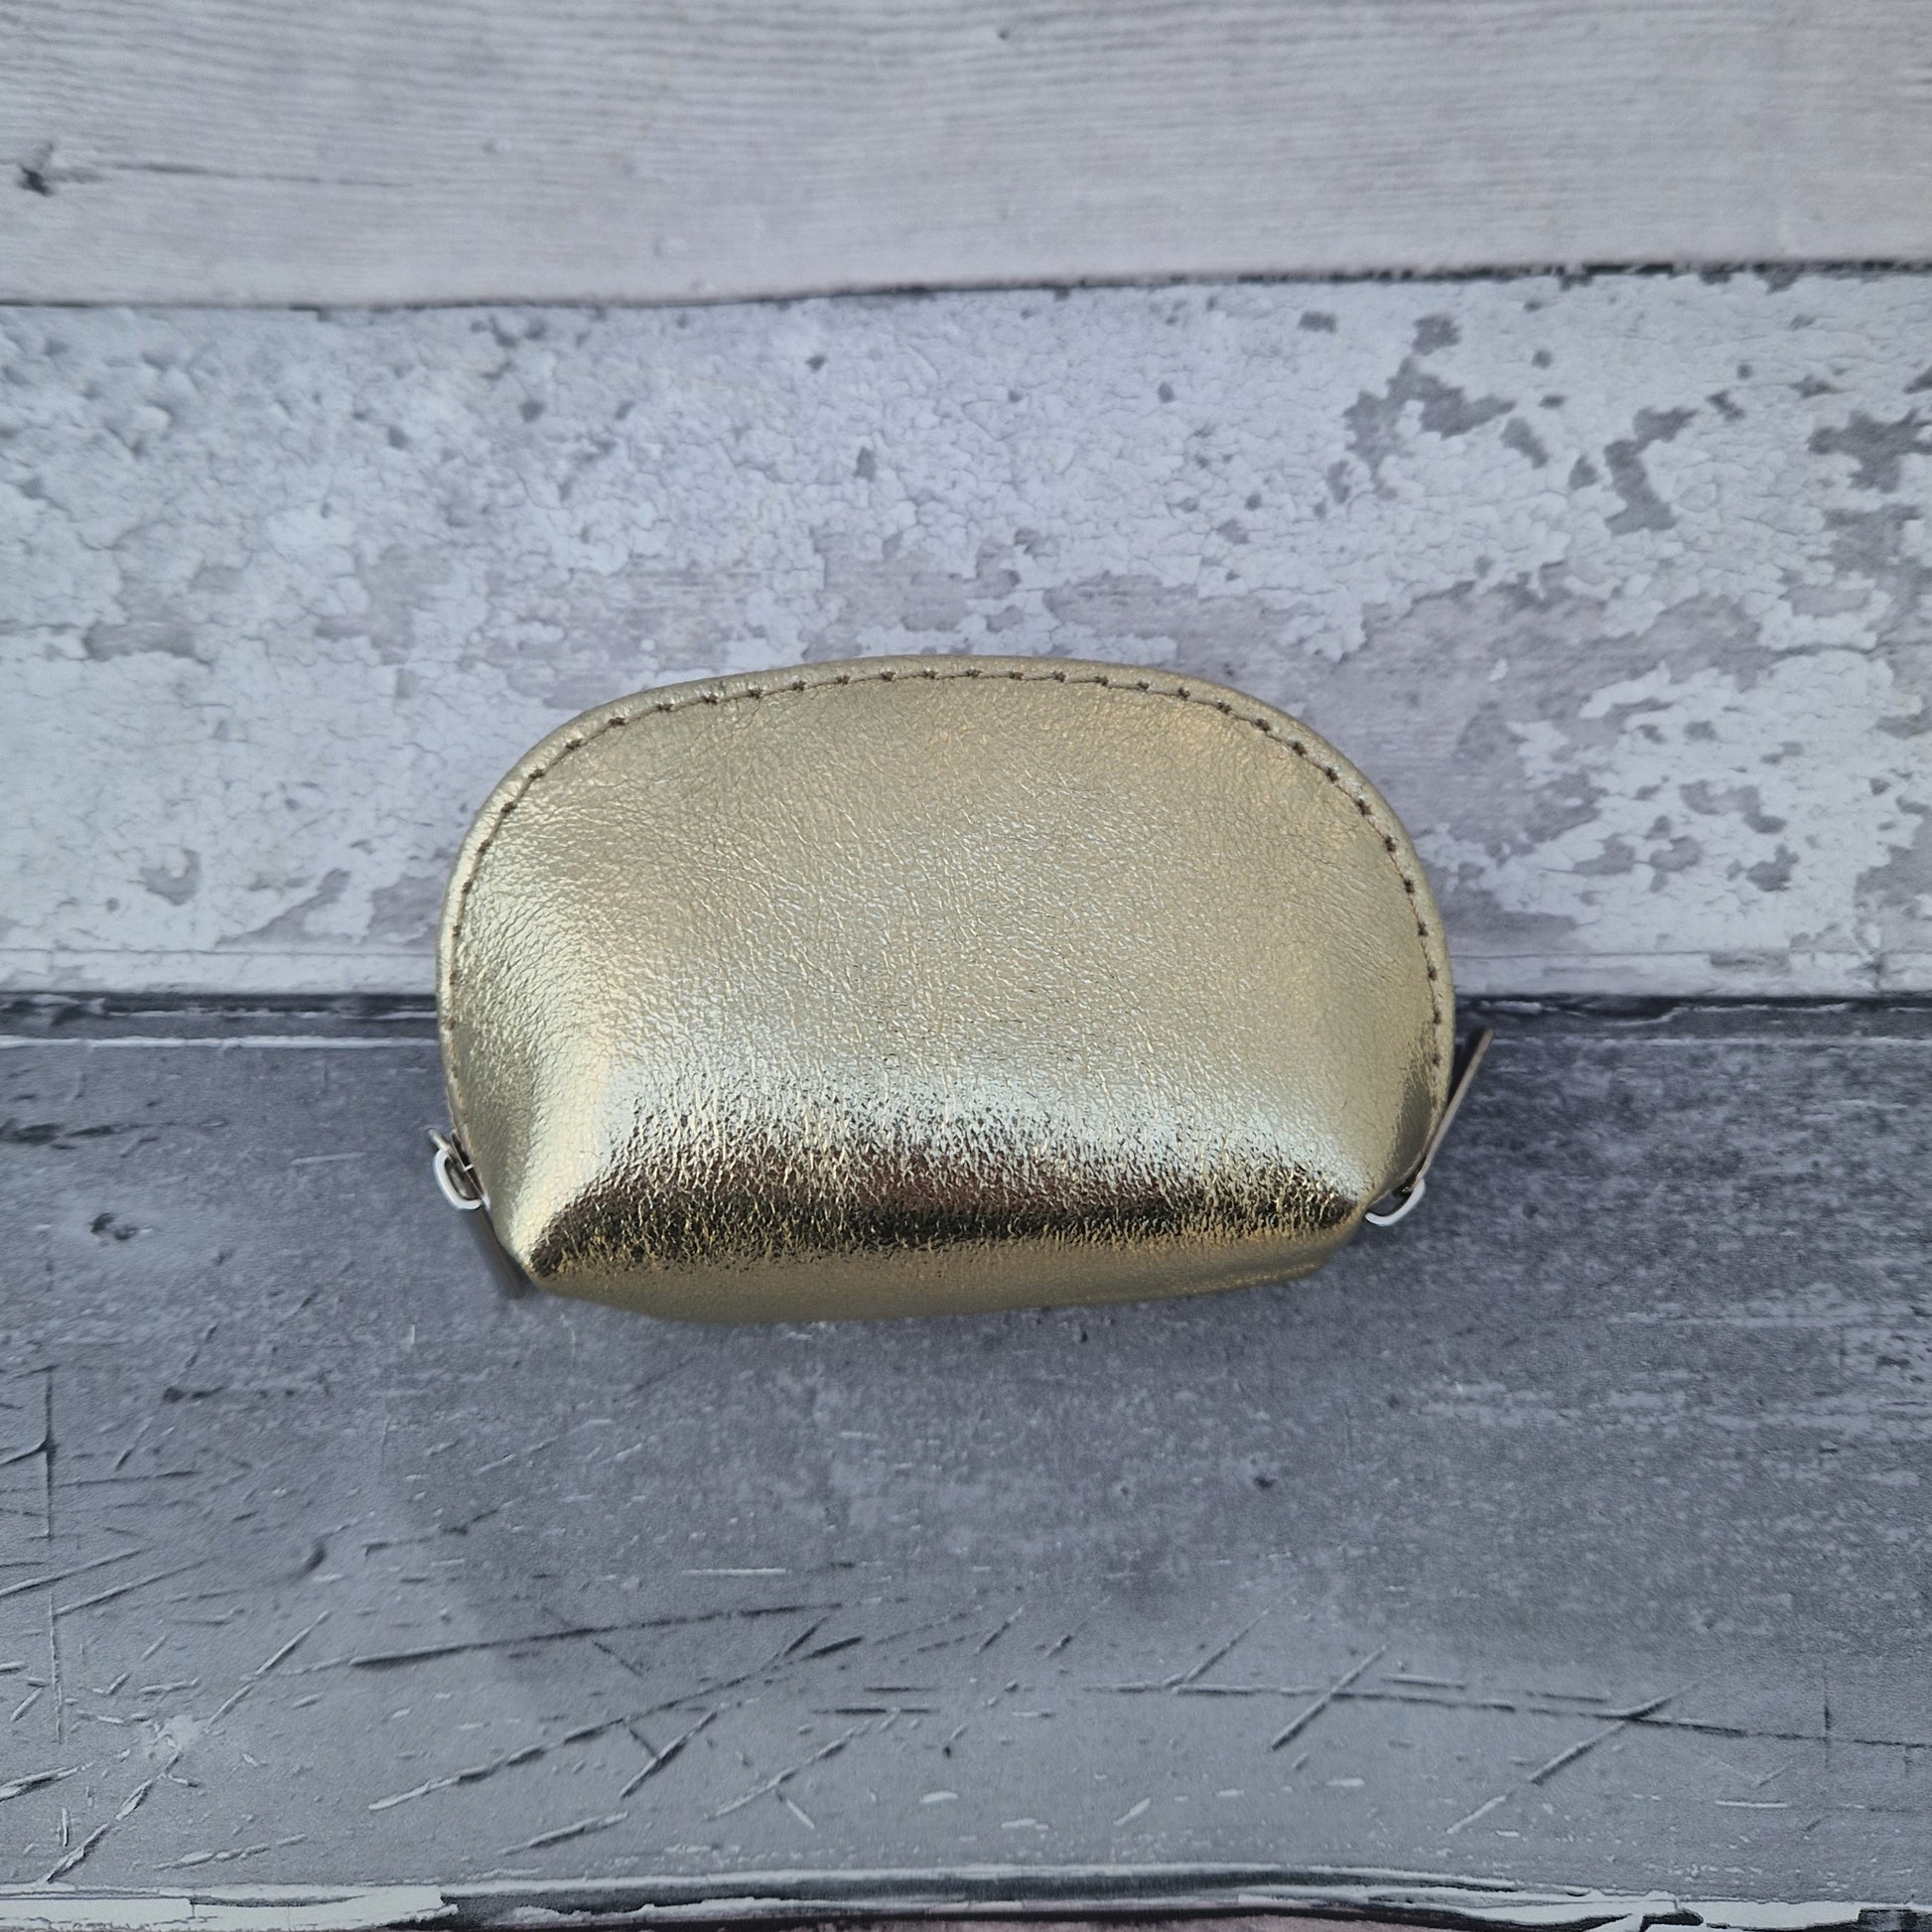 Metallic Gold Leather Coin purse